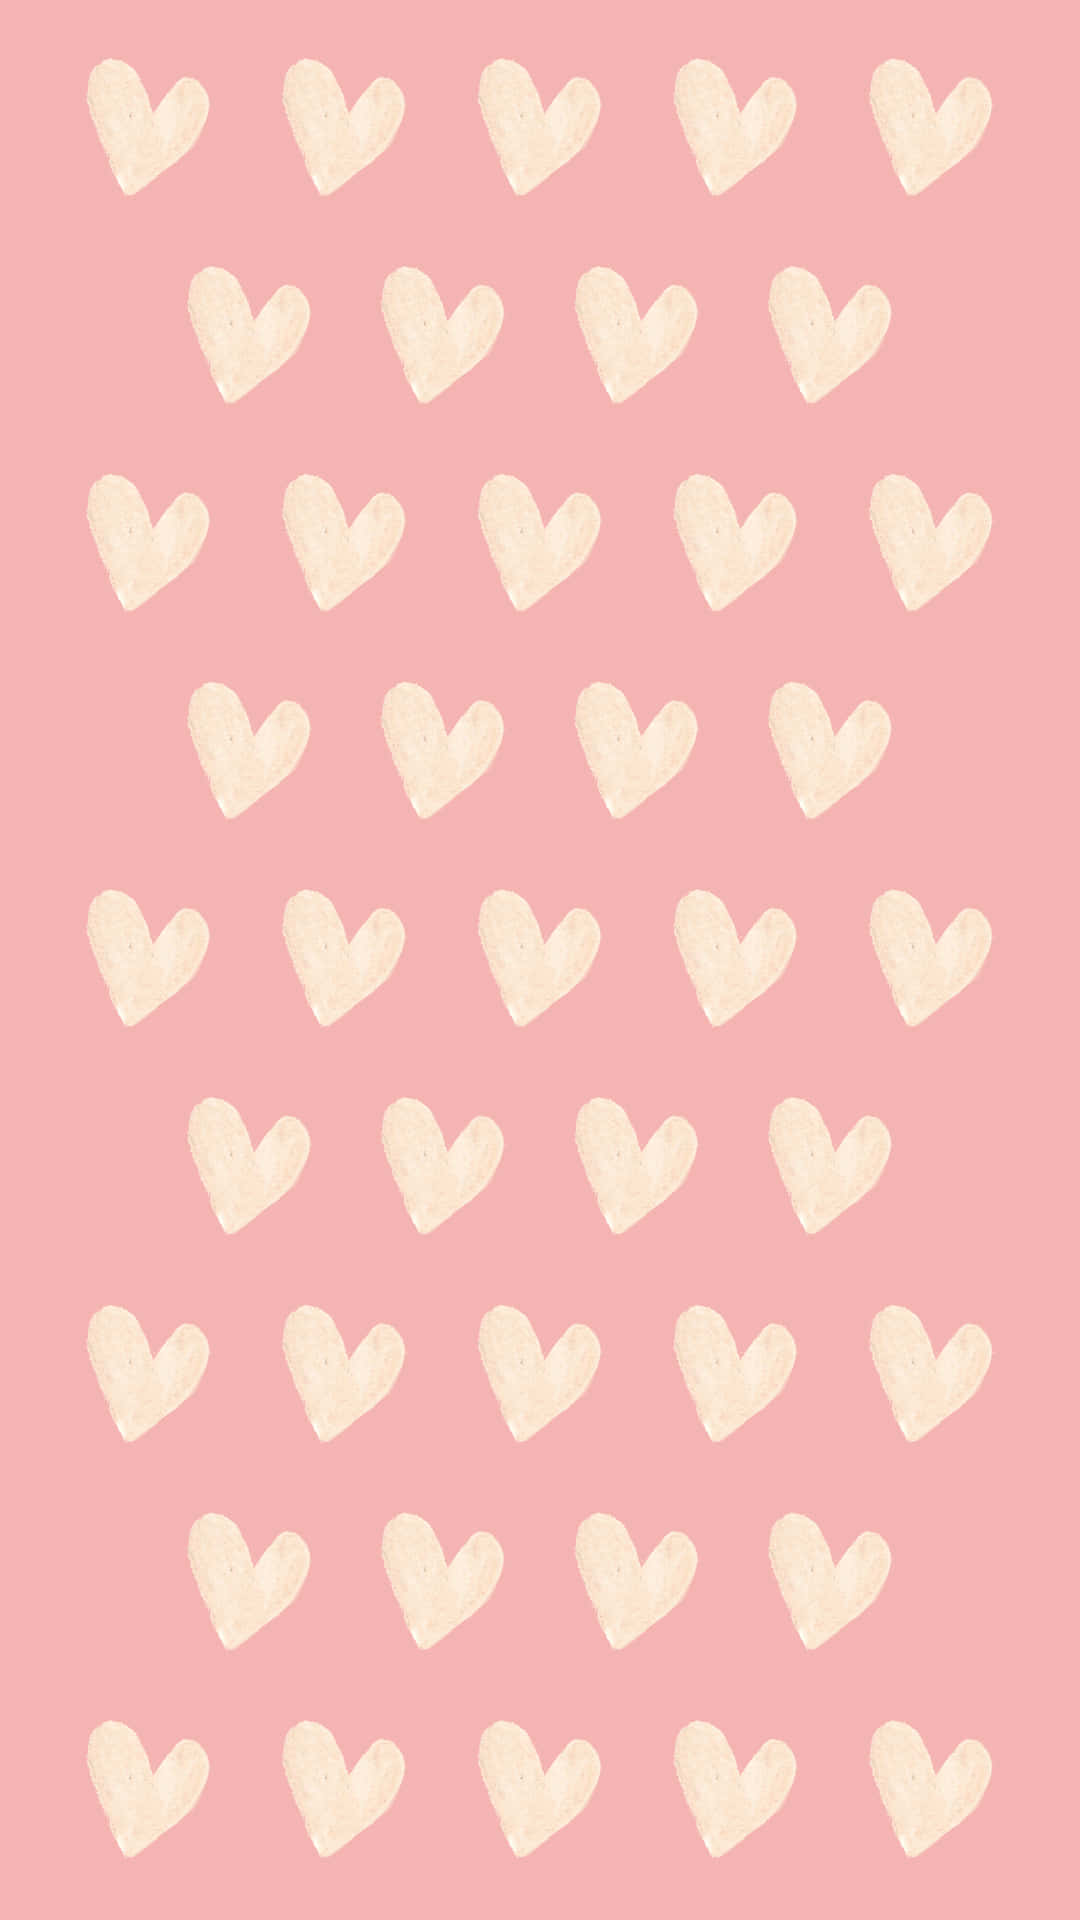 A Pink Background With White Hearts On It Wallpaper